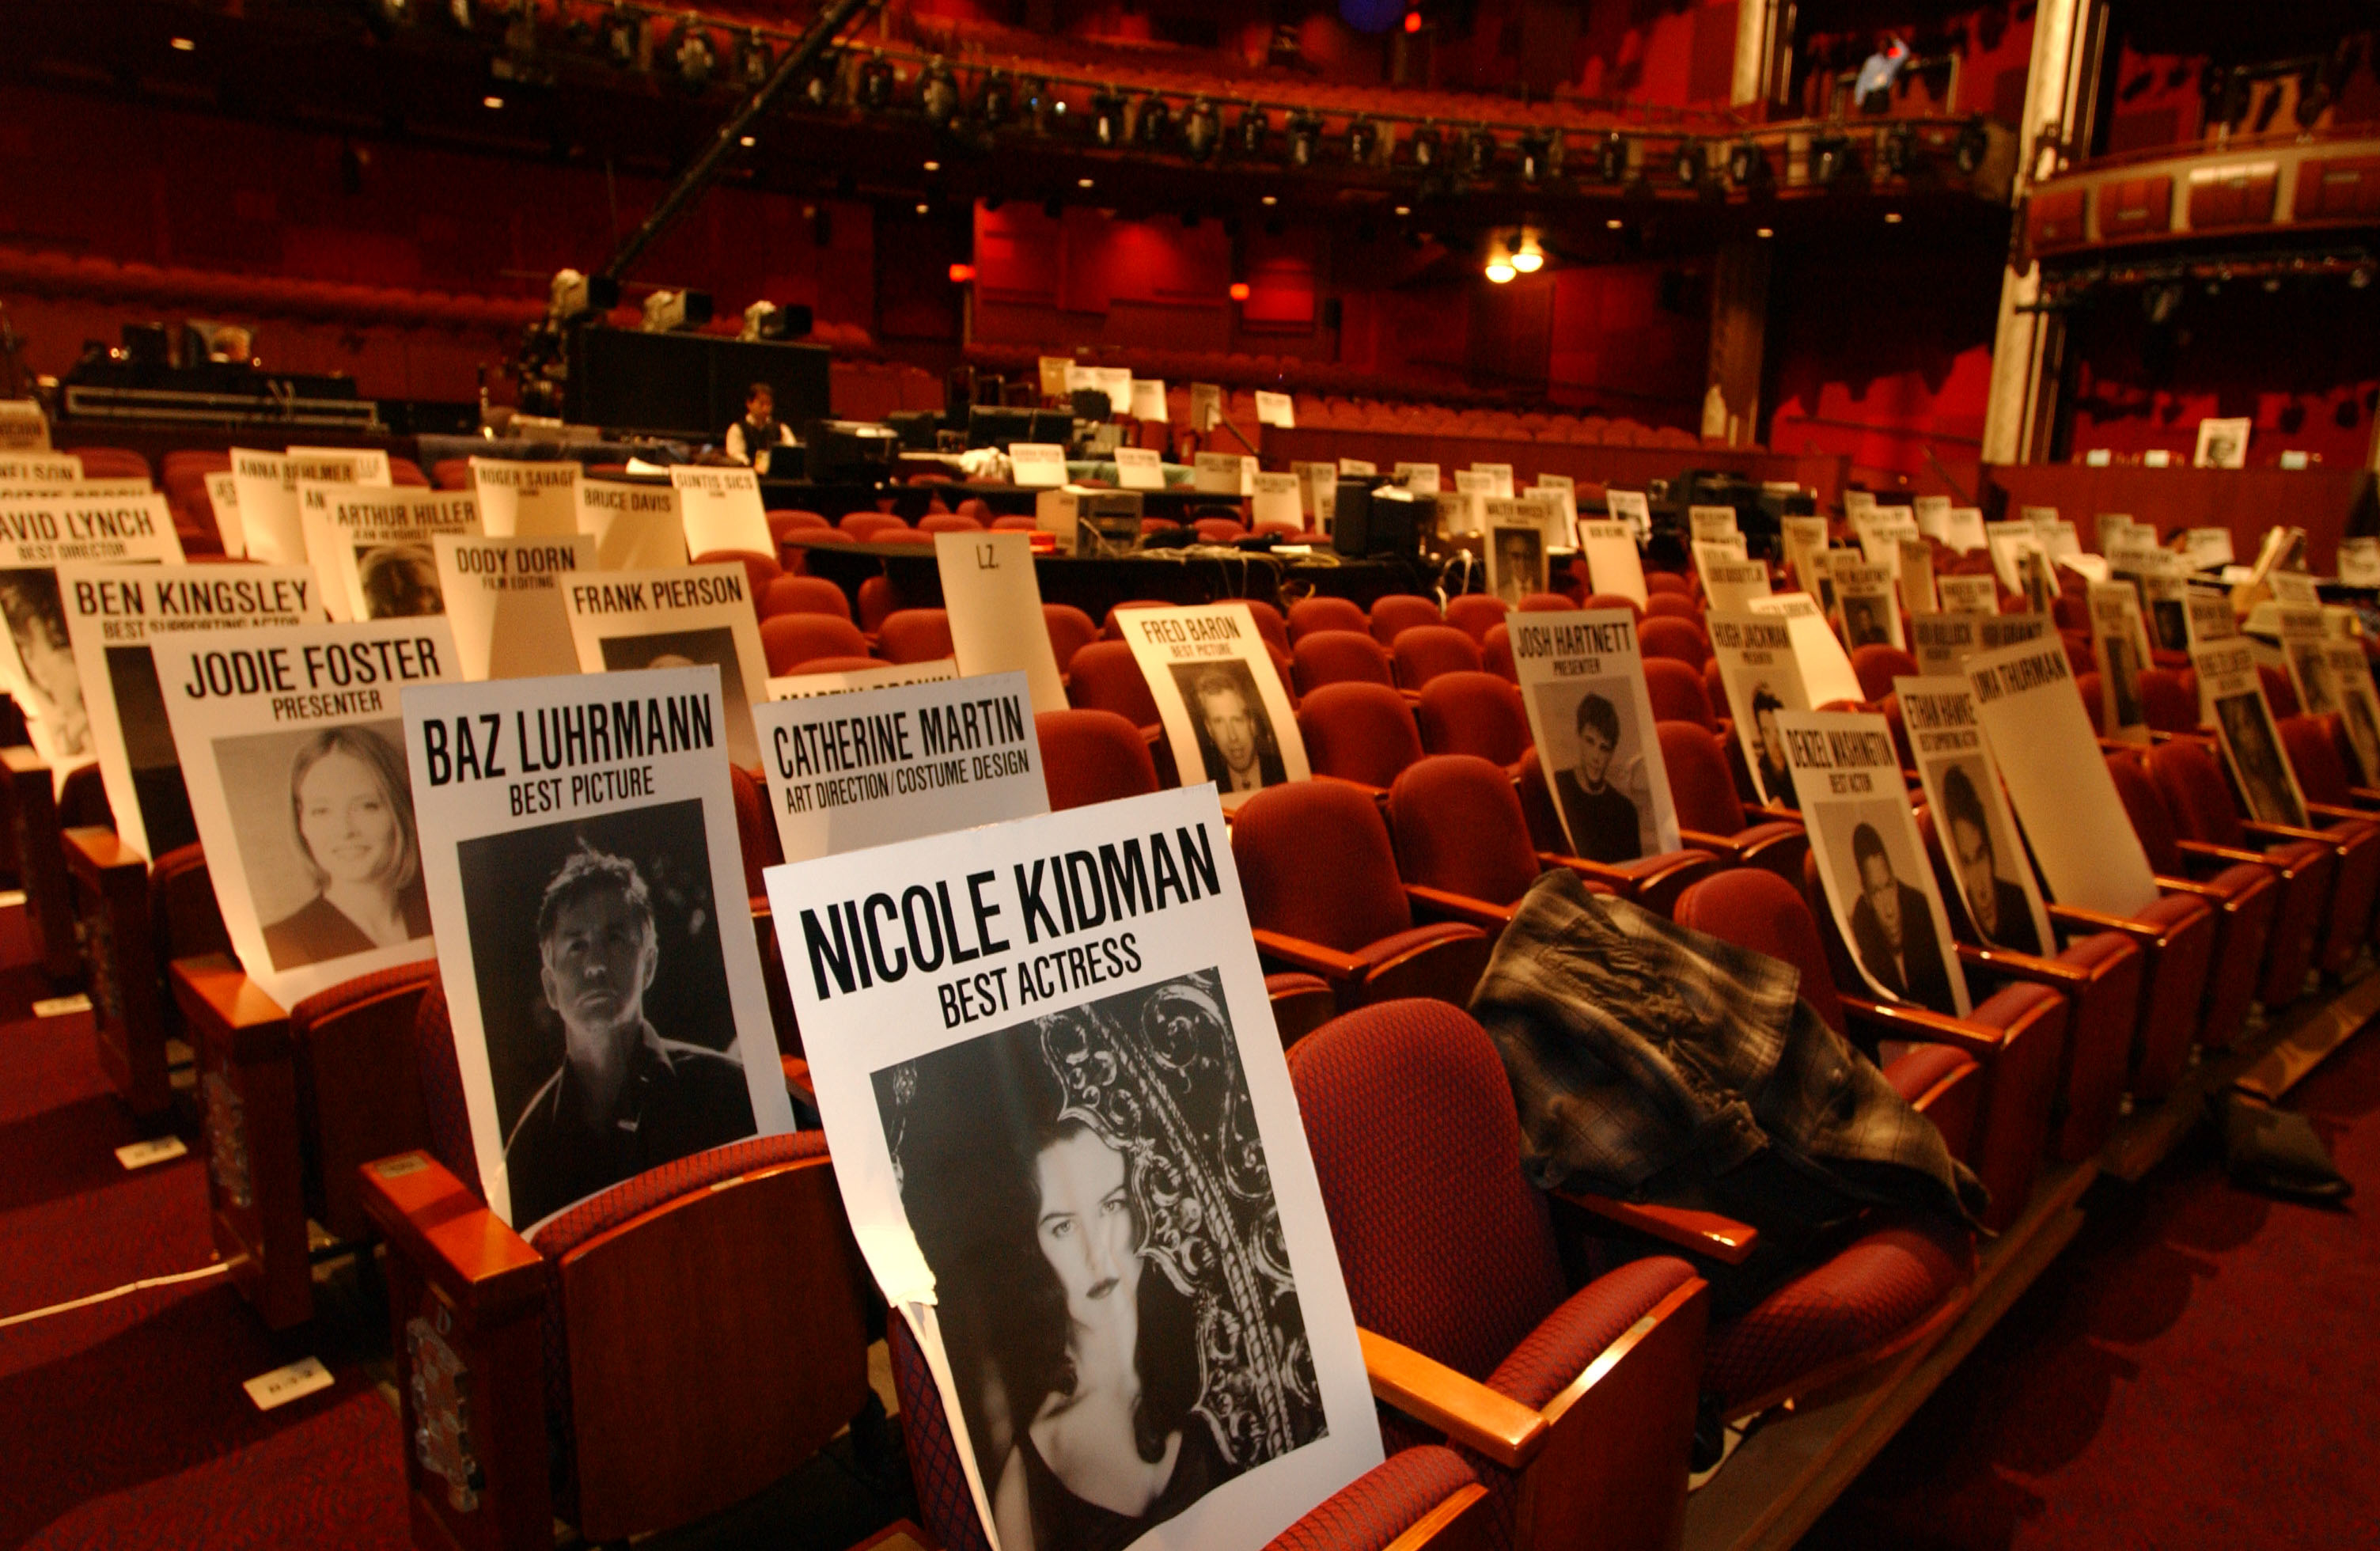 Theater seats with reserved signs for celebrities like Nicole Kidman for an awards event